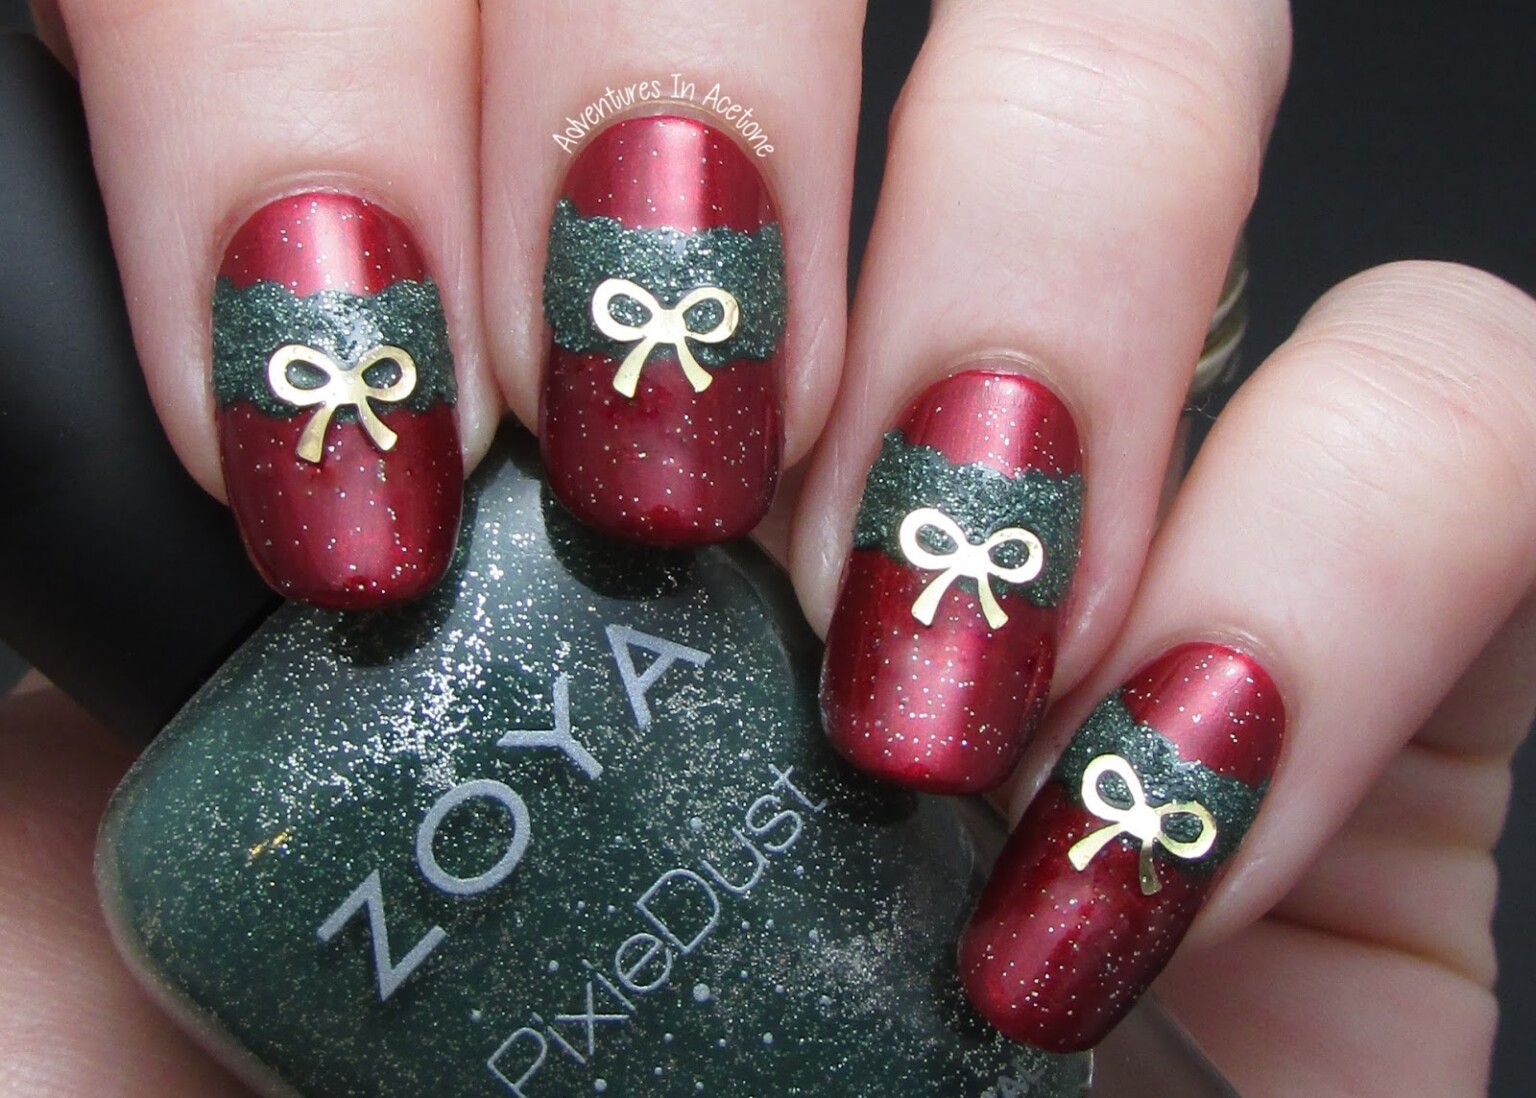 6. "Green, Red, and Gold Glitter Christmas Nail Designs" - wide 2